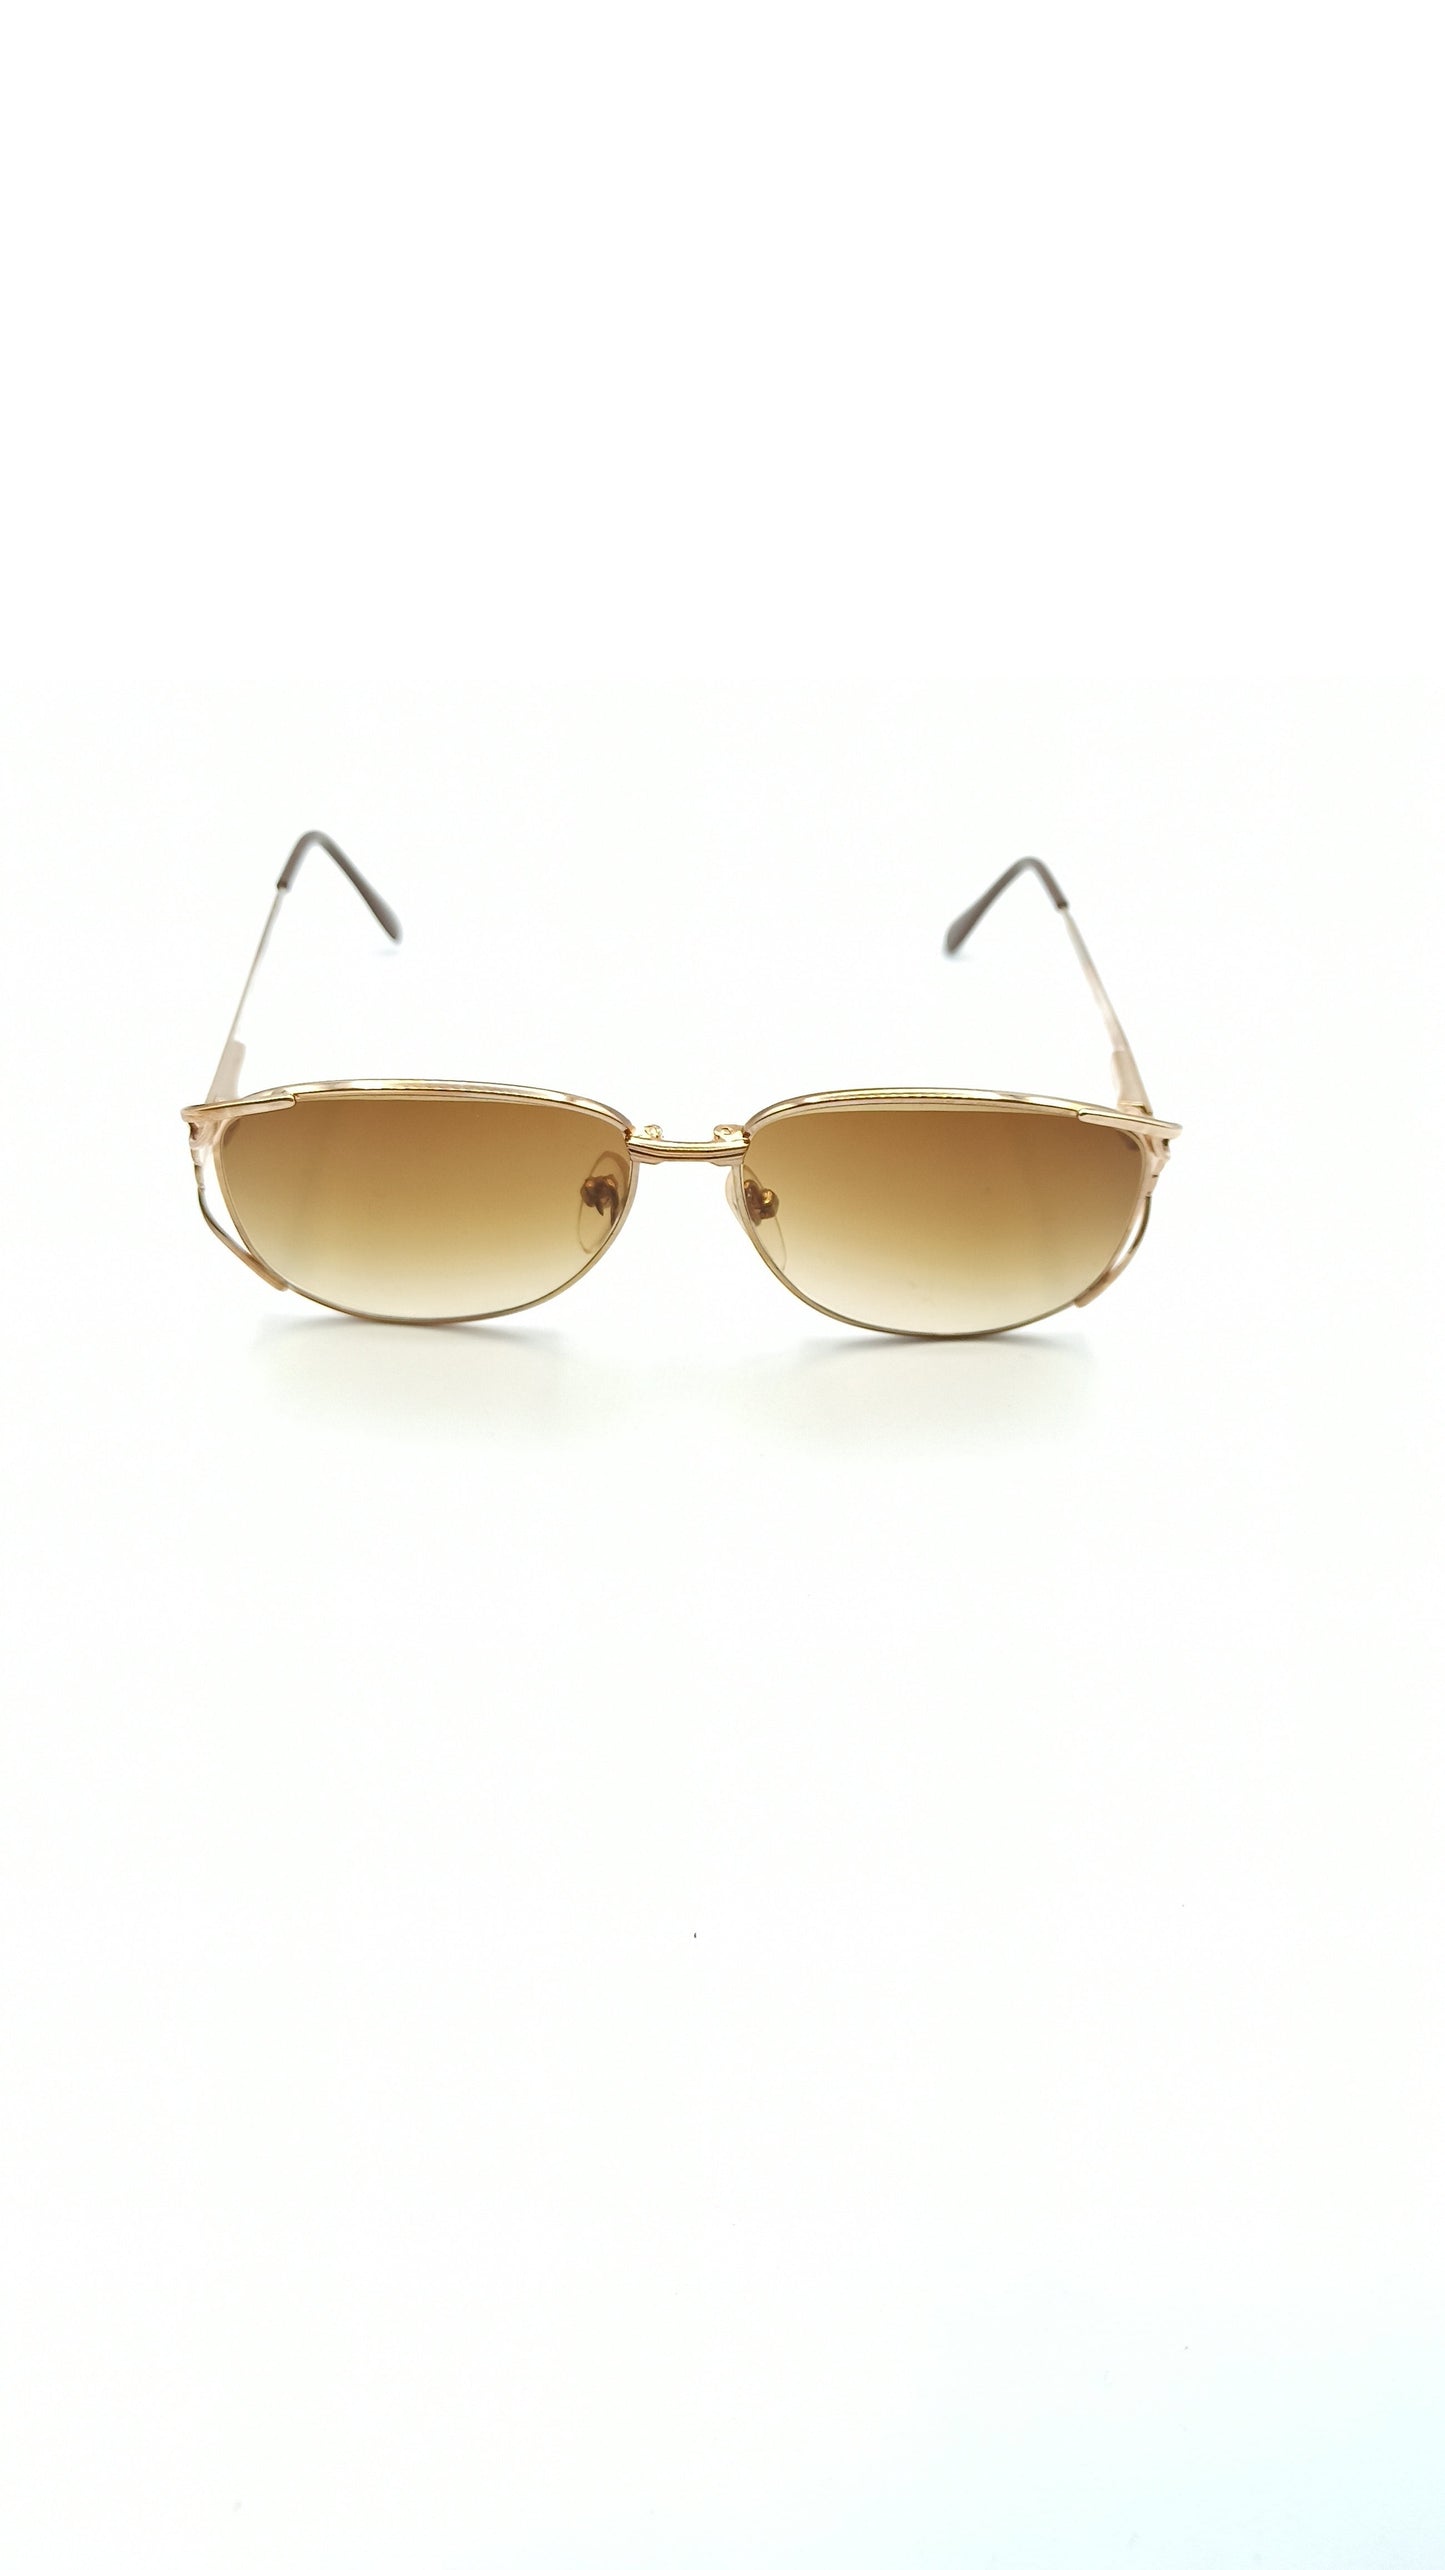 Vintage sunglasses for women made in Spain Qoolst Boogie 